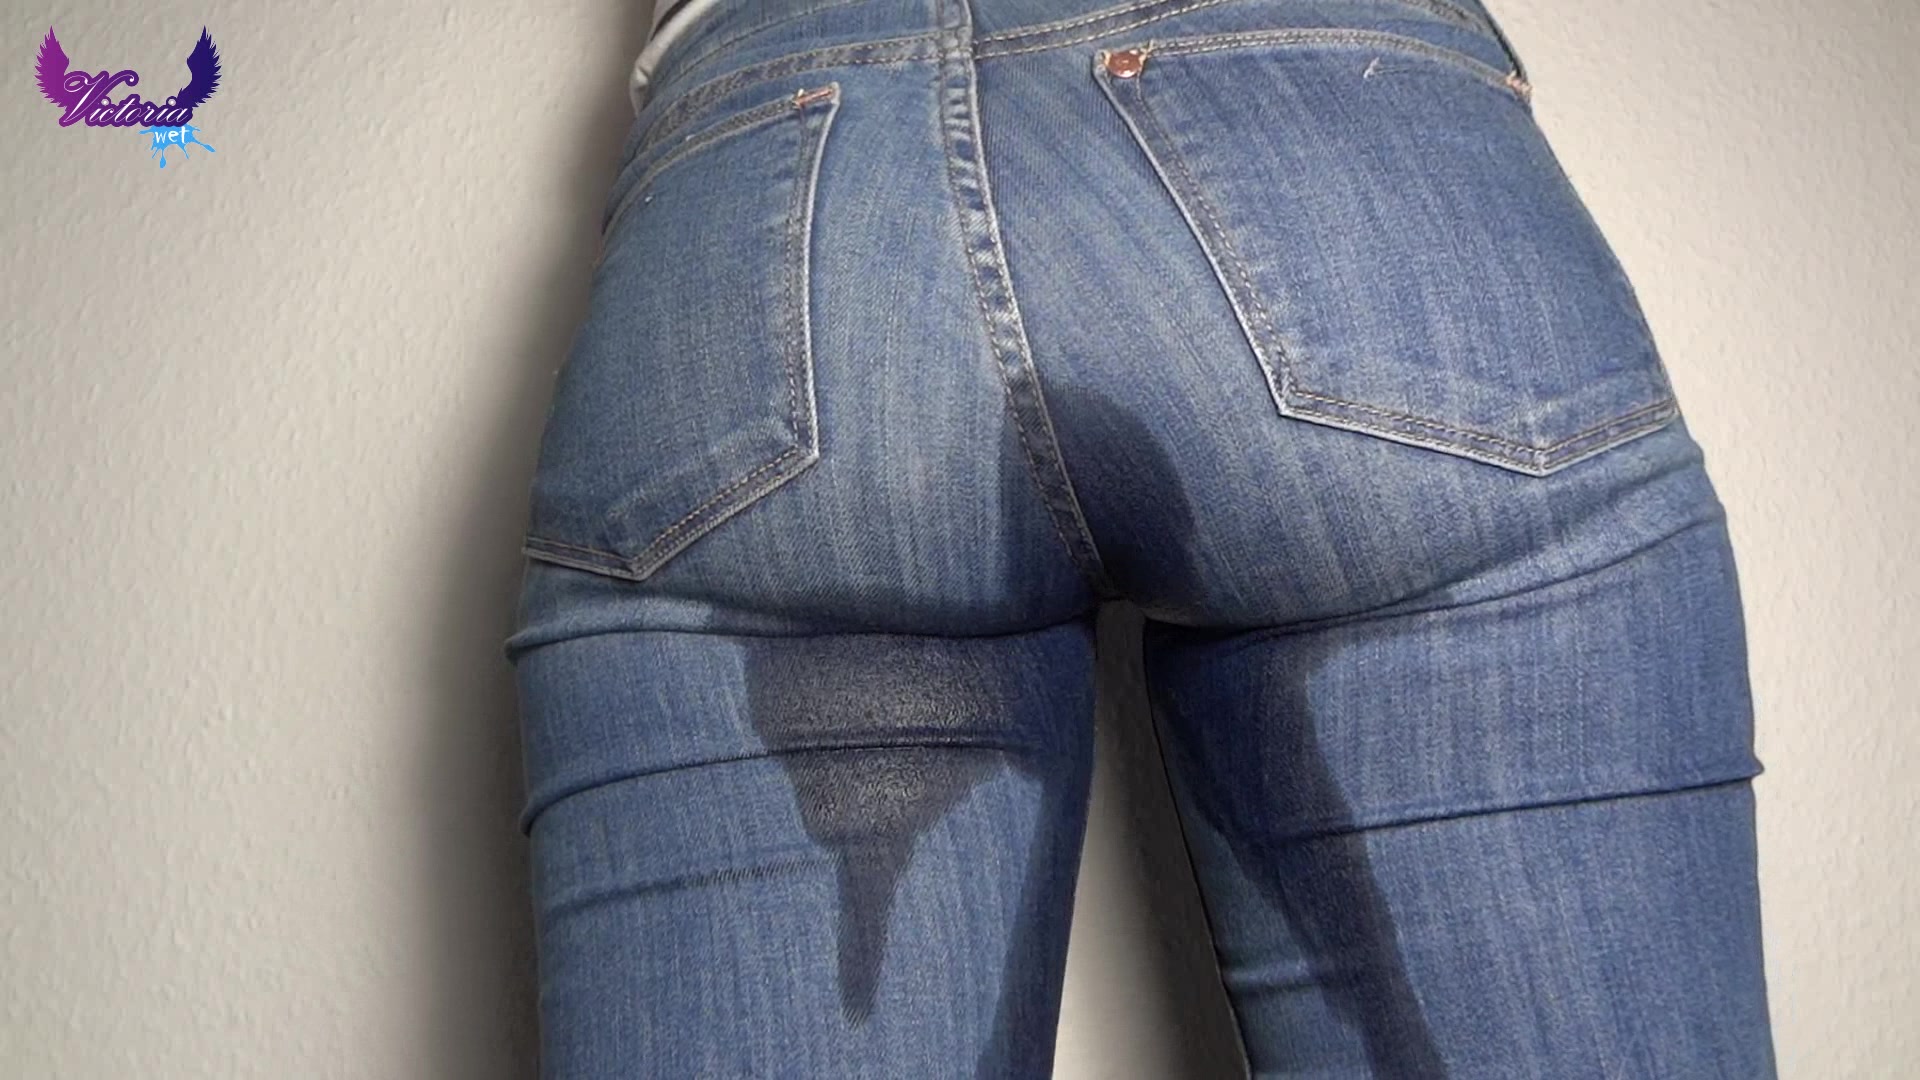 Wetting her jeans